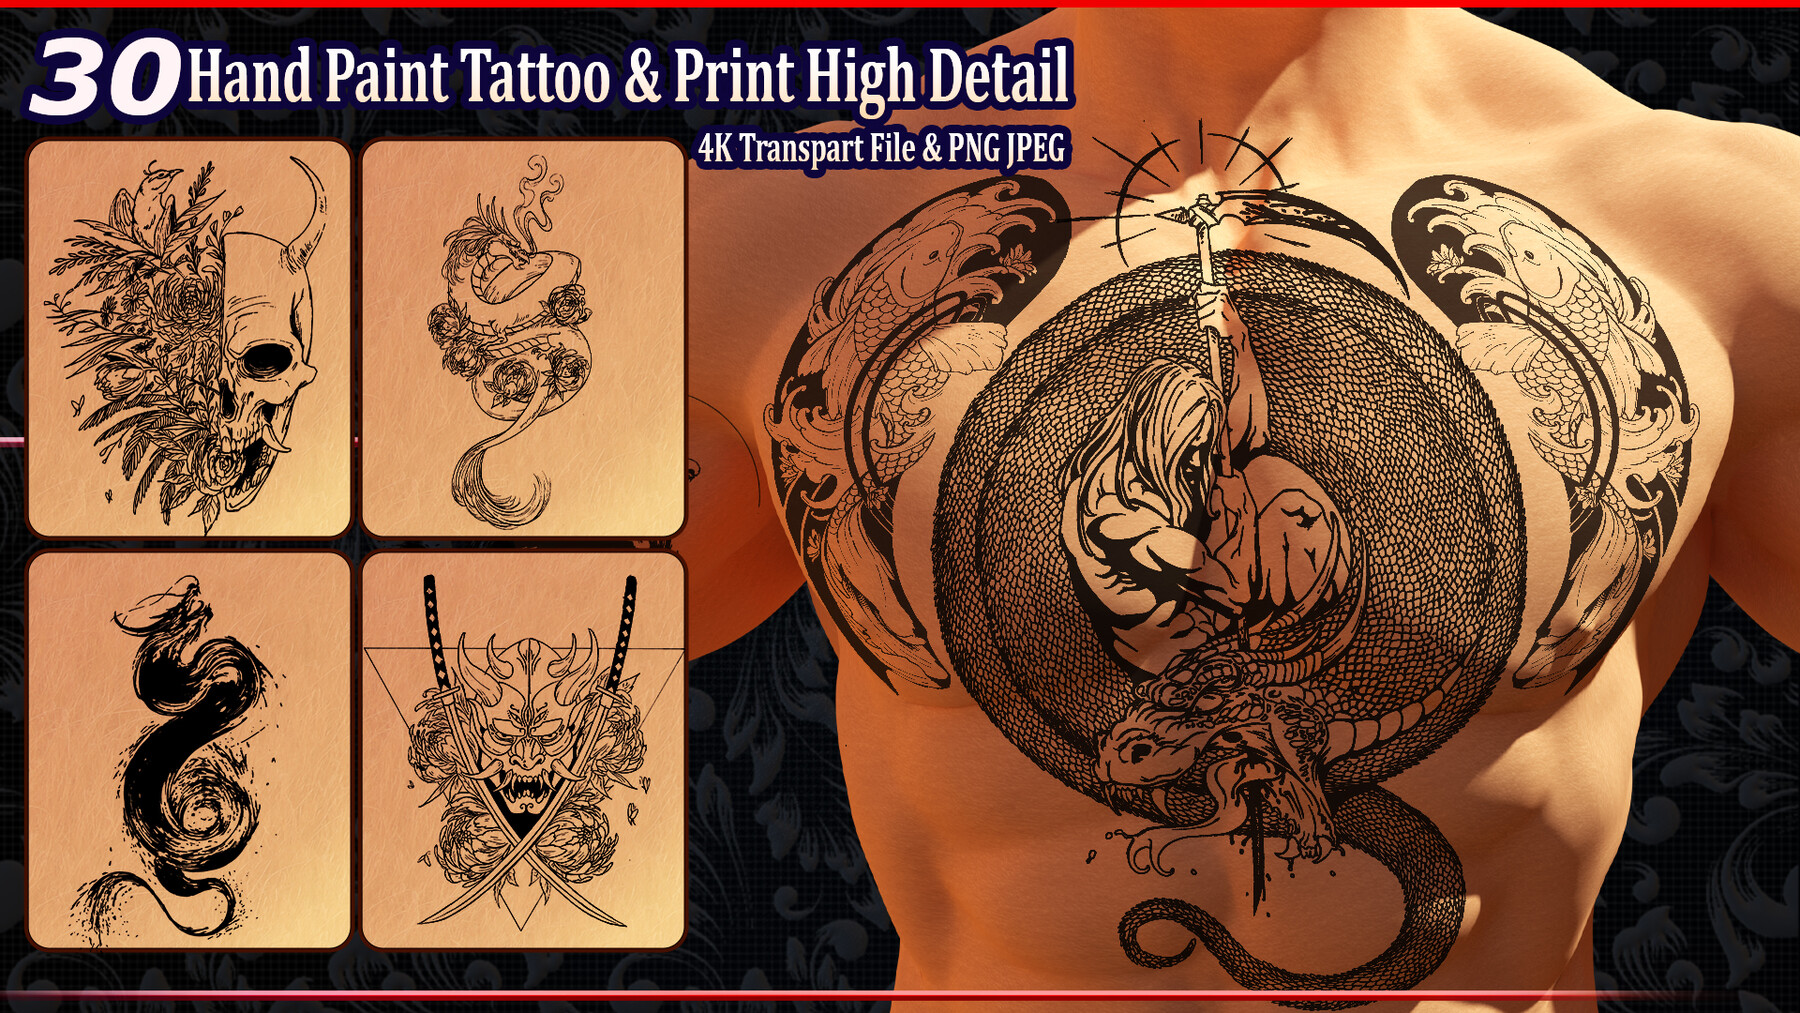 ArtStation - 45 4K HAND DRAW LUCIFER TATTOO AND PRINT - HIGH END QUALITY  RES - (ALPHA & TRANSPARENT) - VOL96 | Brushes